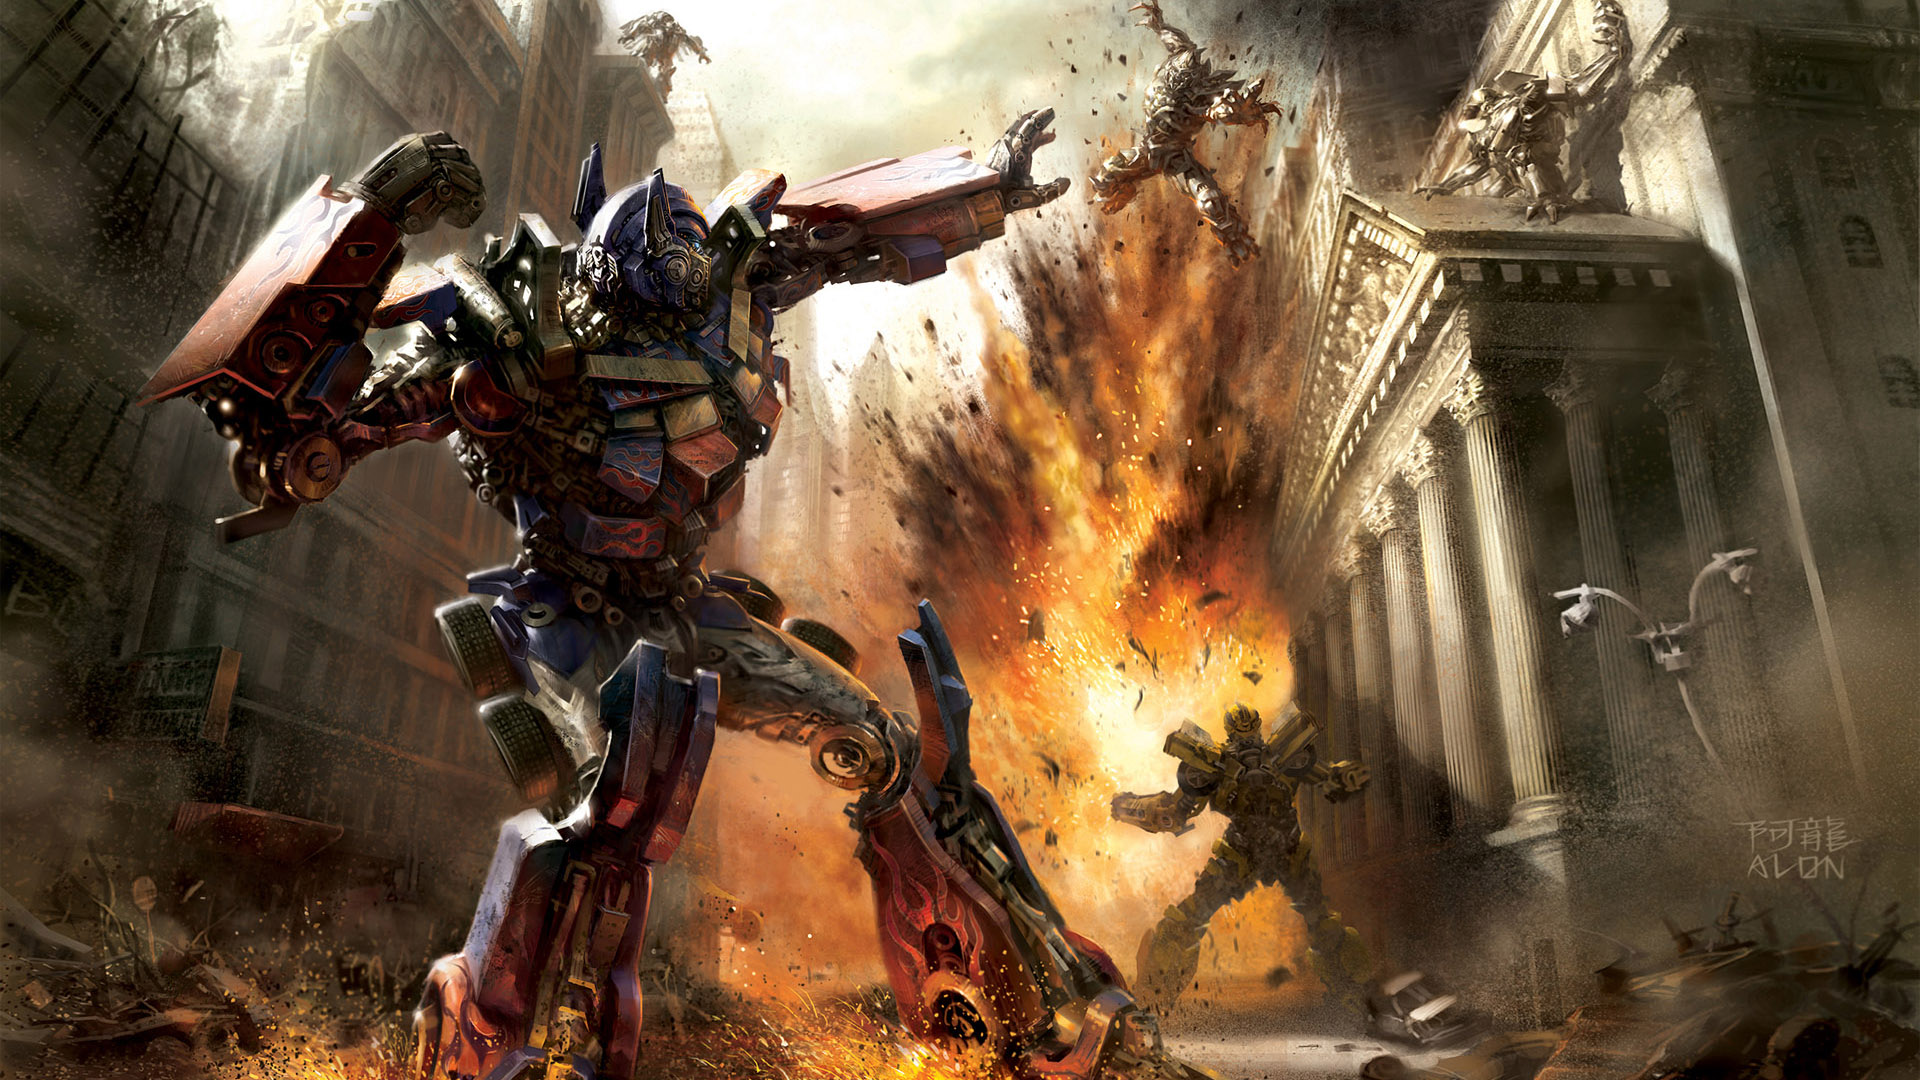 Download HQ Transformers 2 Revenge Of The Fallen wallpaper / Movies / 1920x1080